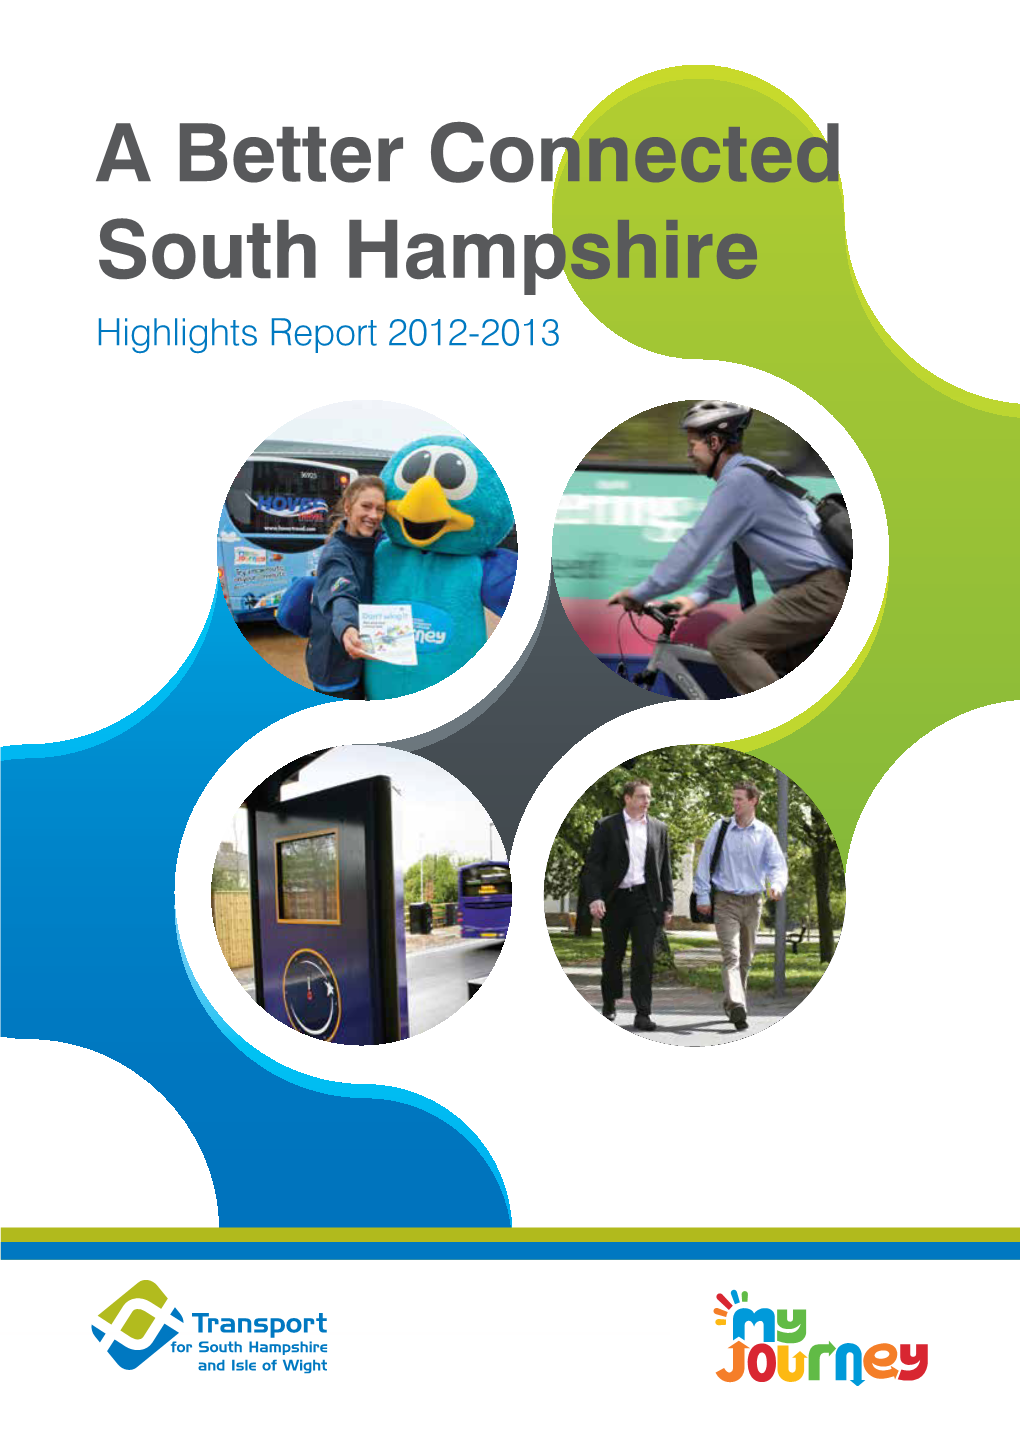 A Better Connected South Hampshire Highlights Report 2012-2013